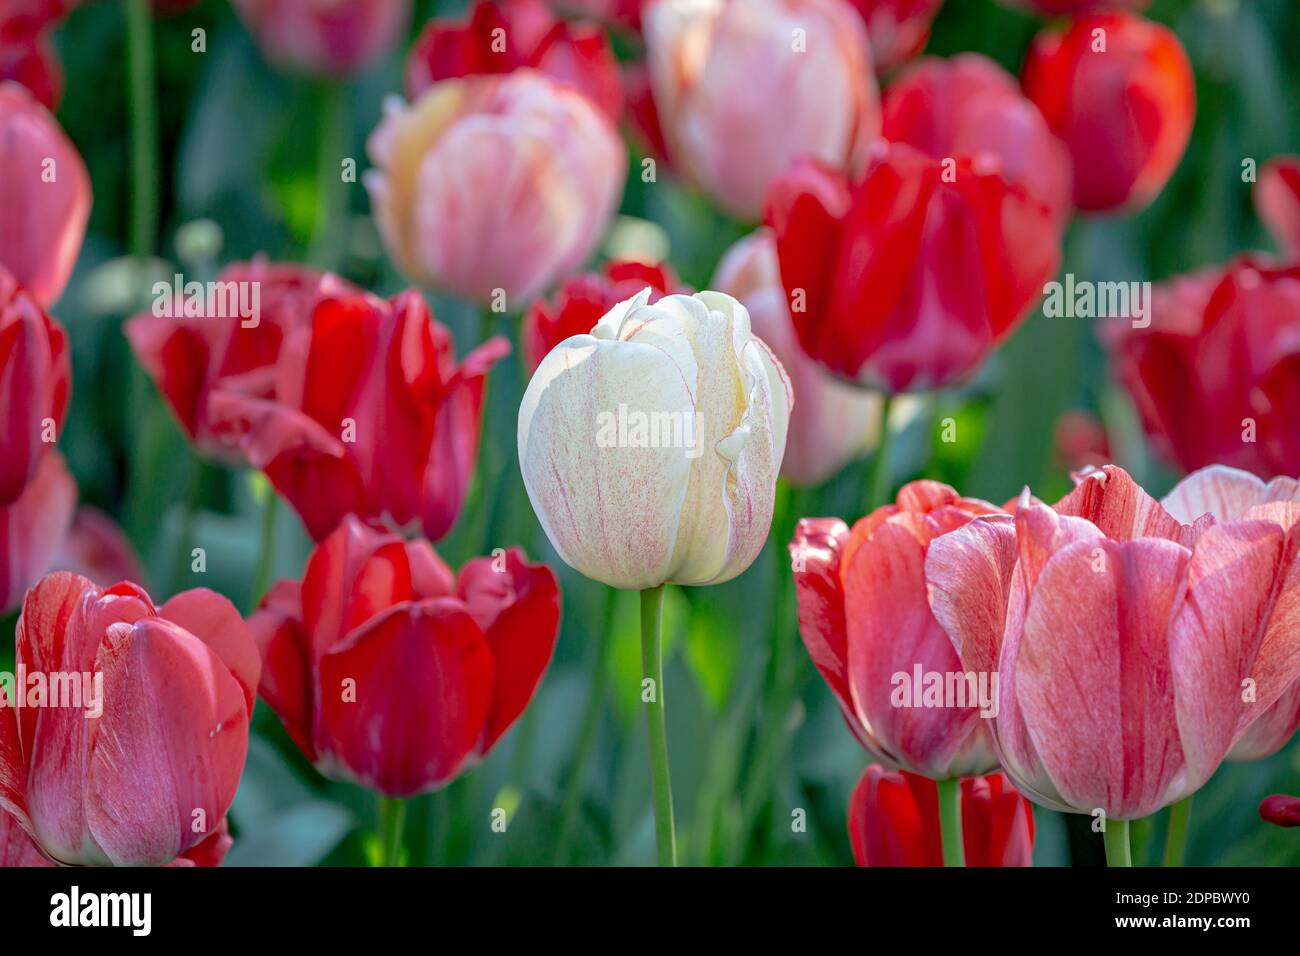 A white tulip amongst a bed of red and pink tulips, in springtime Stock Photo